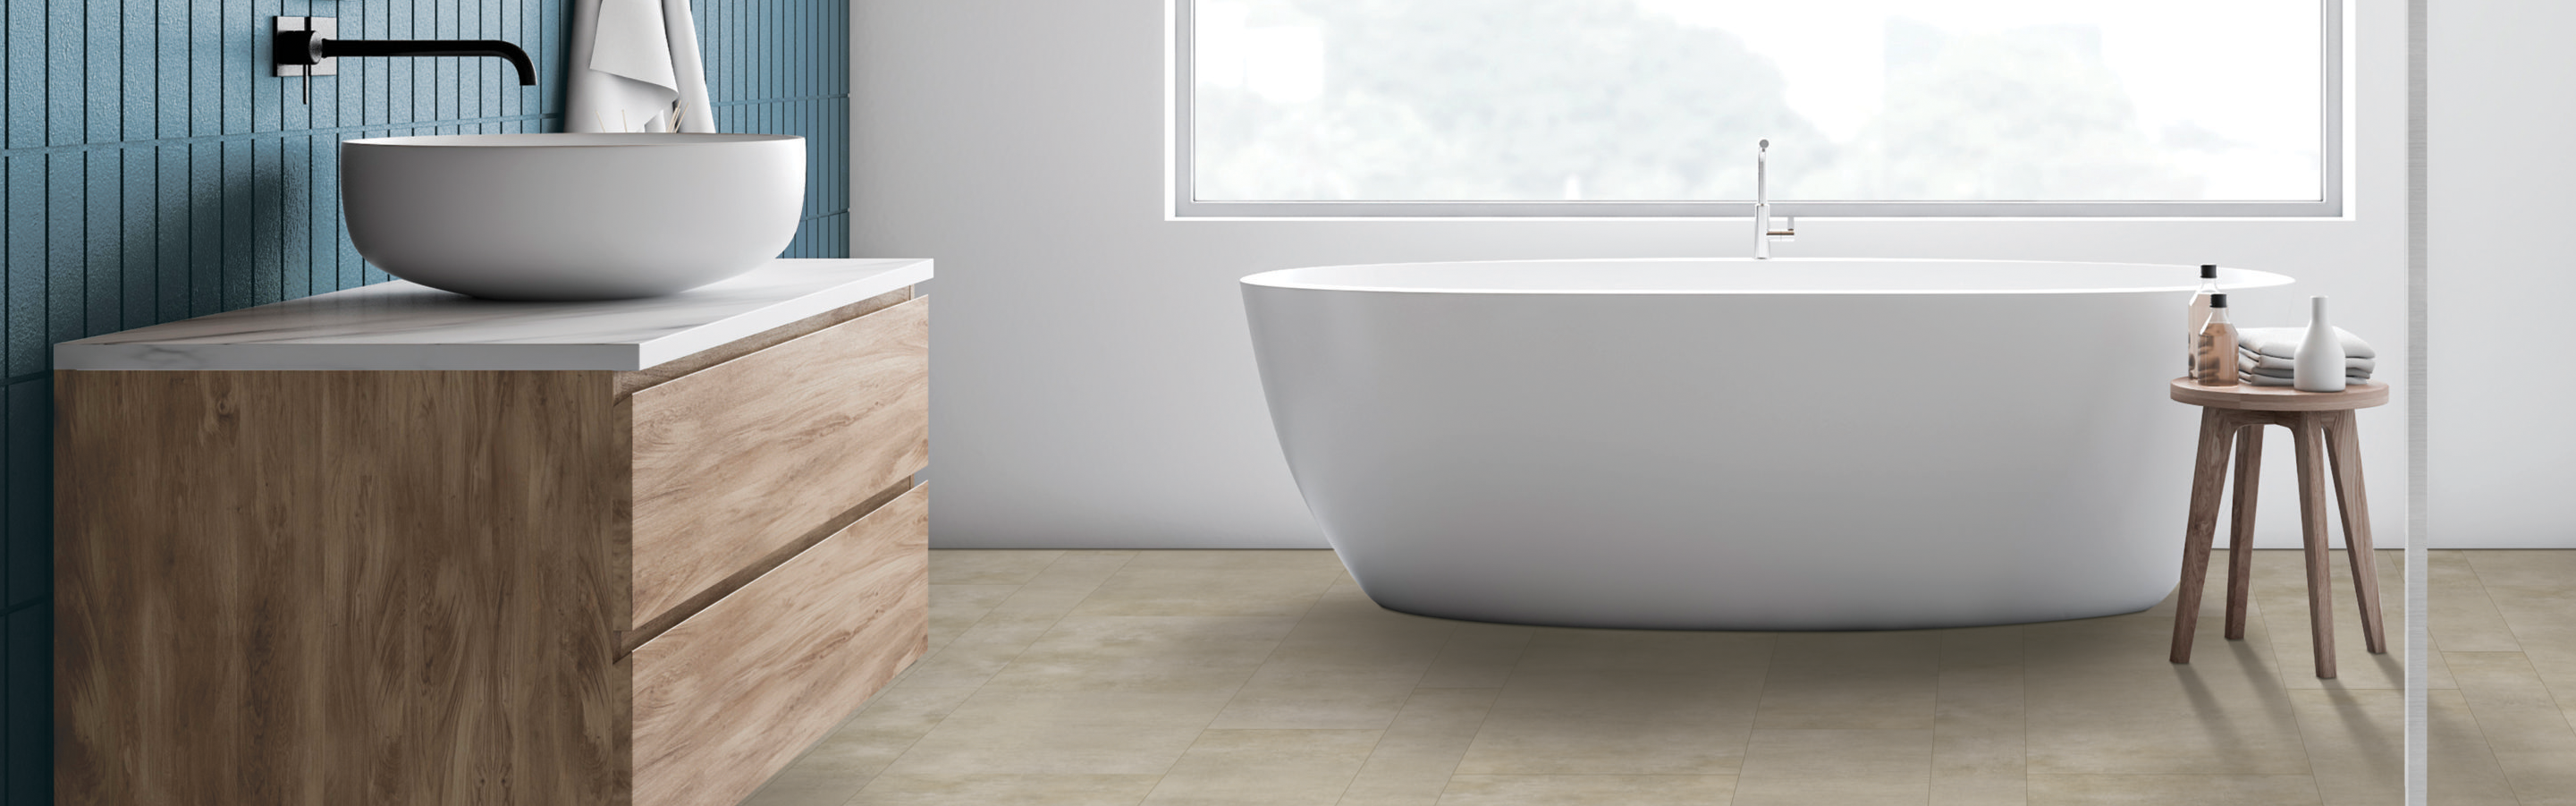 Wood look vinyl plank in bath with large window and tub 